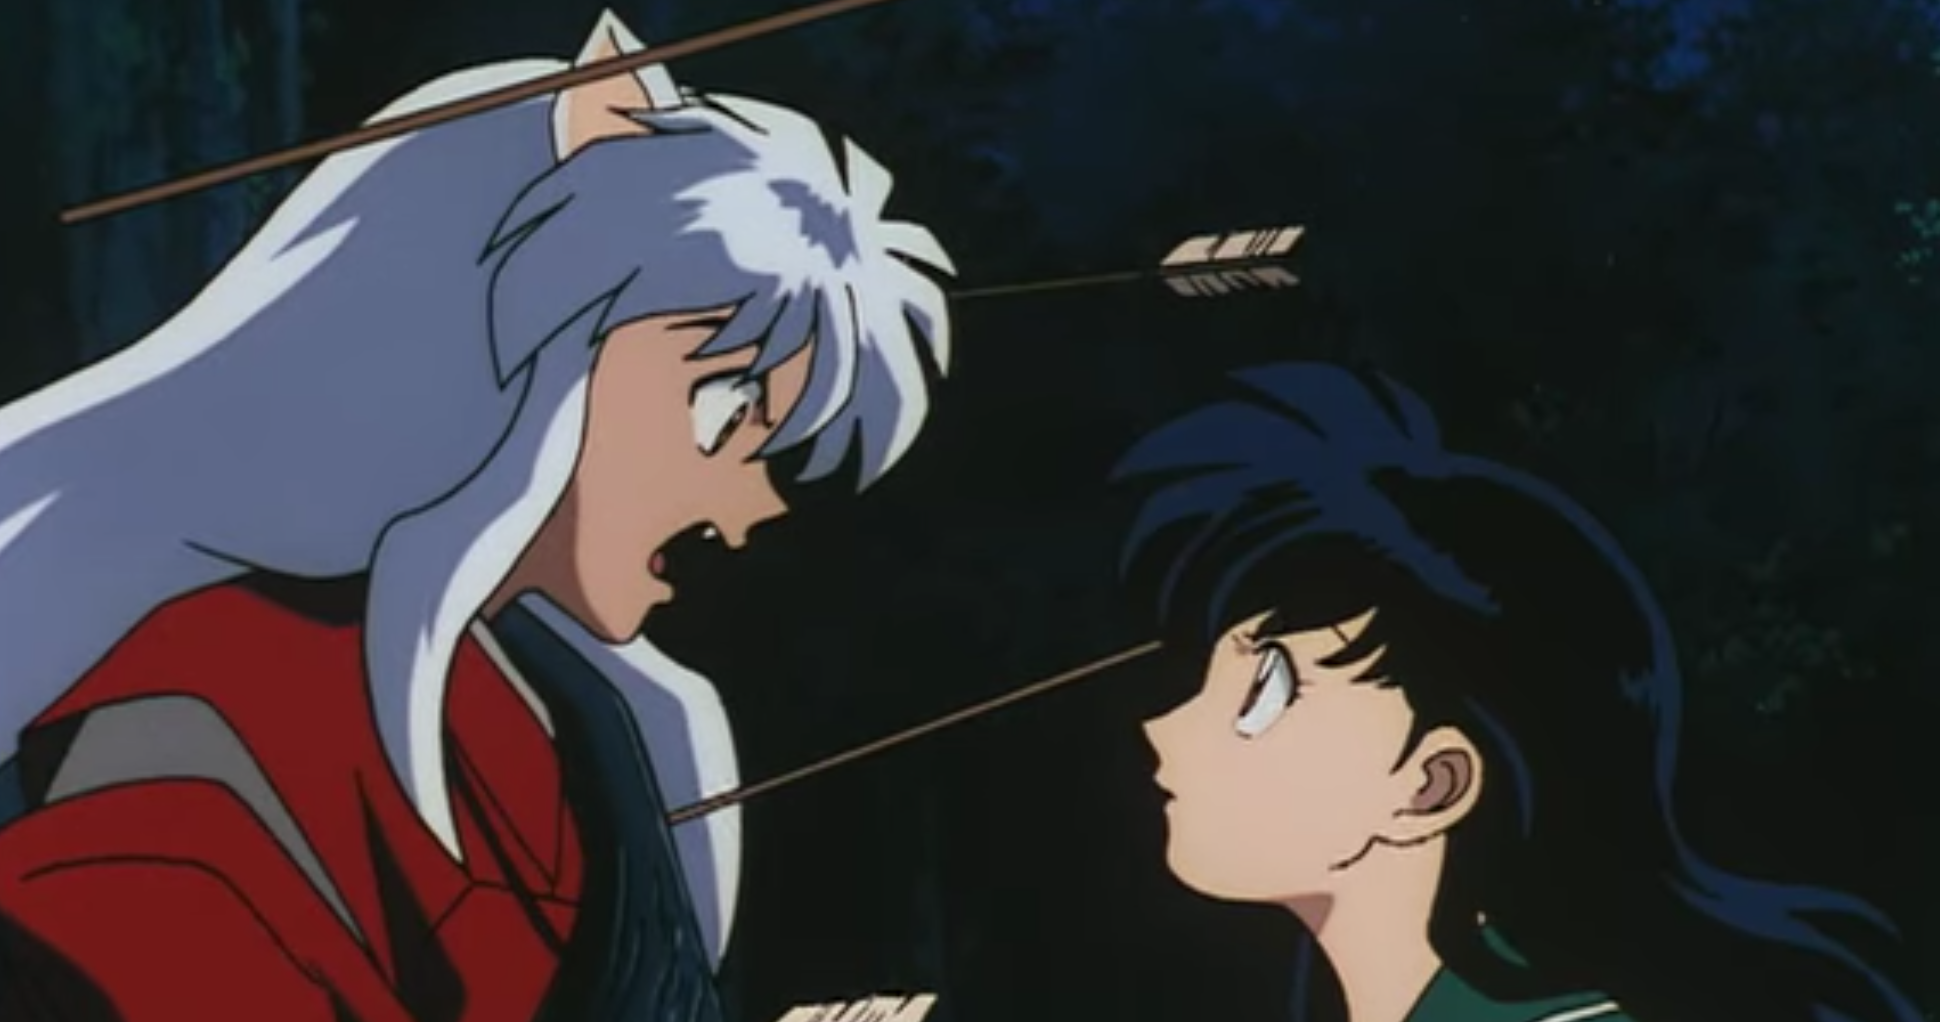 Follow This Order to Best Enjoy ‘InuYasha’